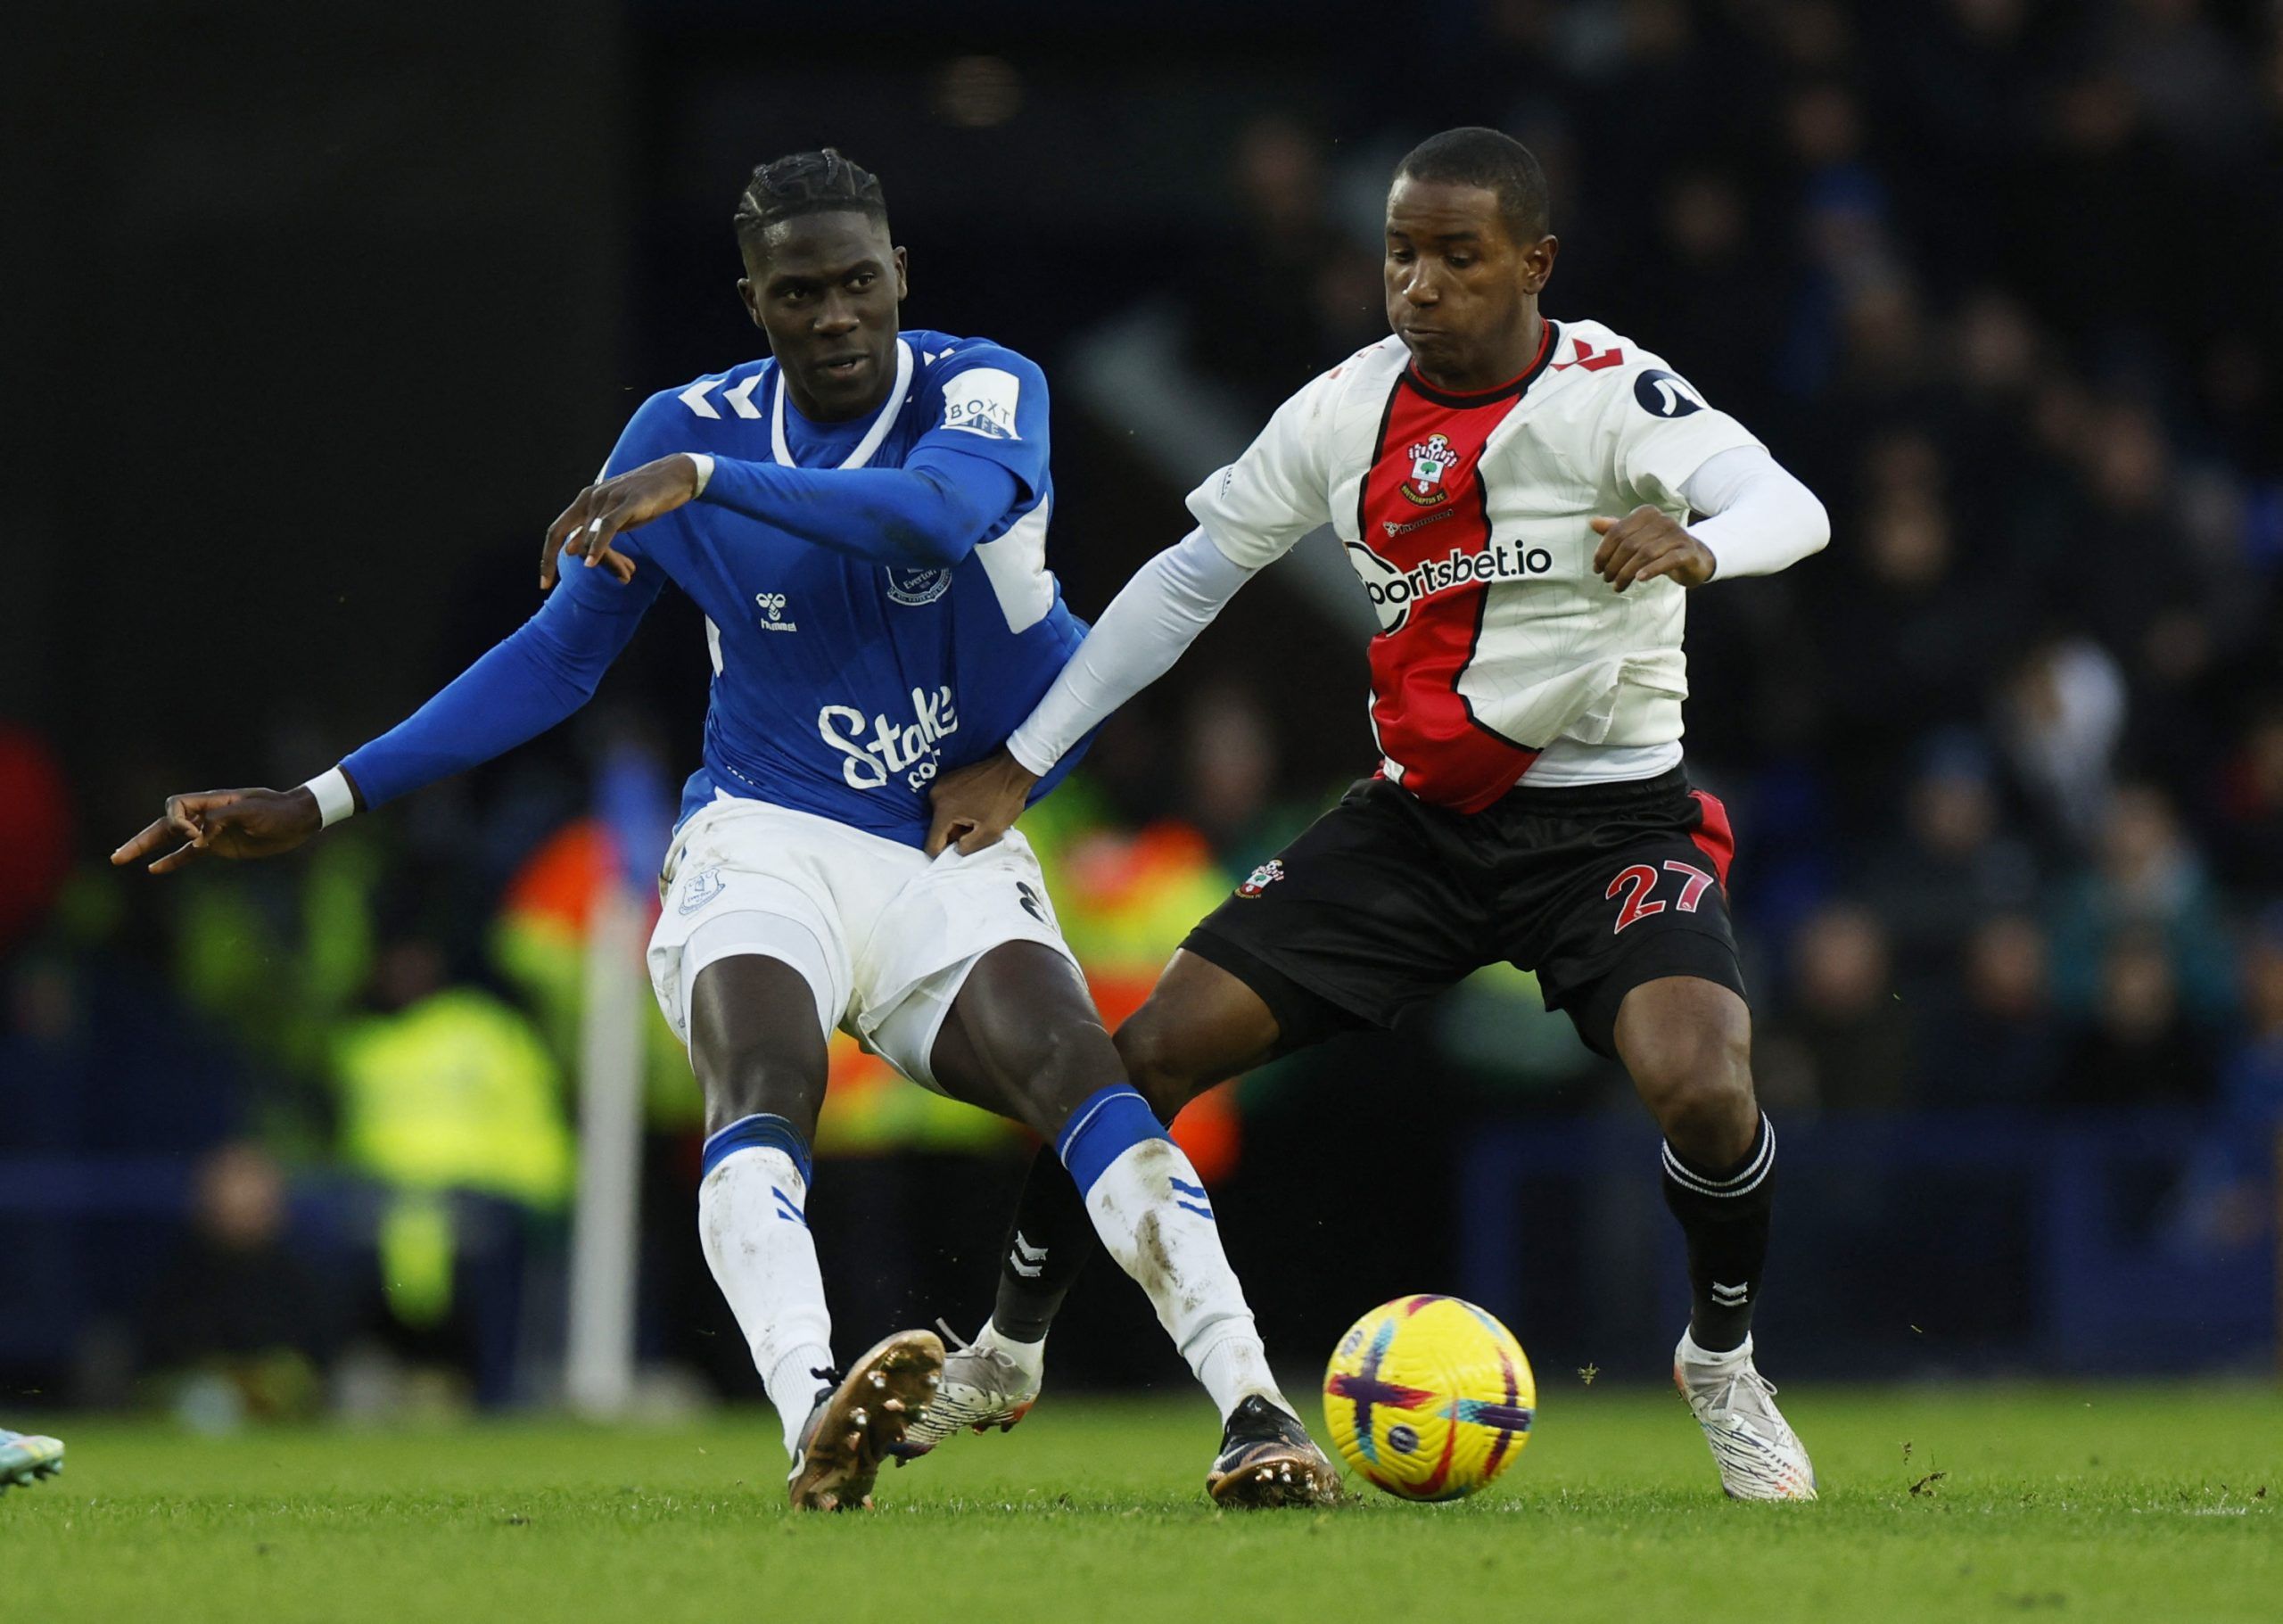 Soccer Football - Premier League - Everton v Southampton - Goodison Park, Liverpool, Britain - January 14, 2023 Everton's Amadou Onana in action with Southampton's Ibrahima Diallo Action Images via Reuters/Jason Cairnduff EDITORIAL USE ONLY. No use with unauthorized audio, video, data, fixture lists, club/league logos or 'live' services. Online in-match use limited to 75 images, no video emulation. No use in betting, games or single club /league/player publications.  Please contact your account 